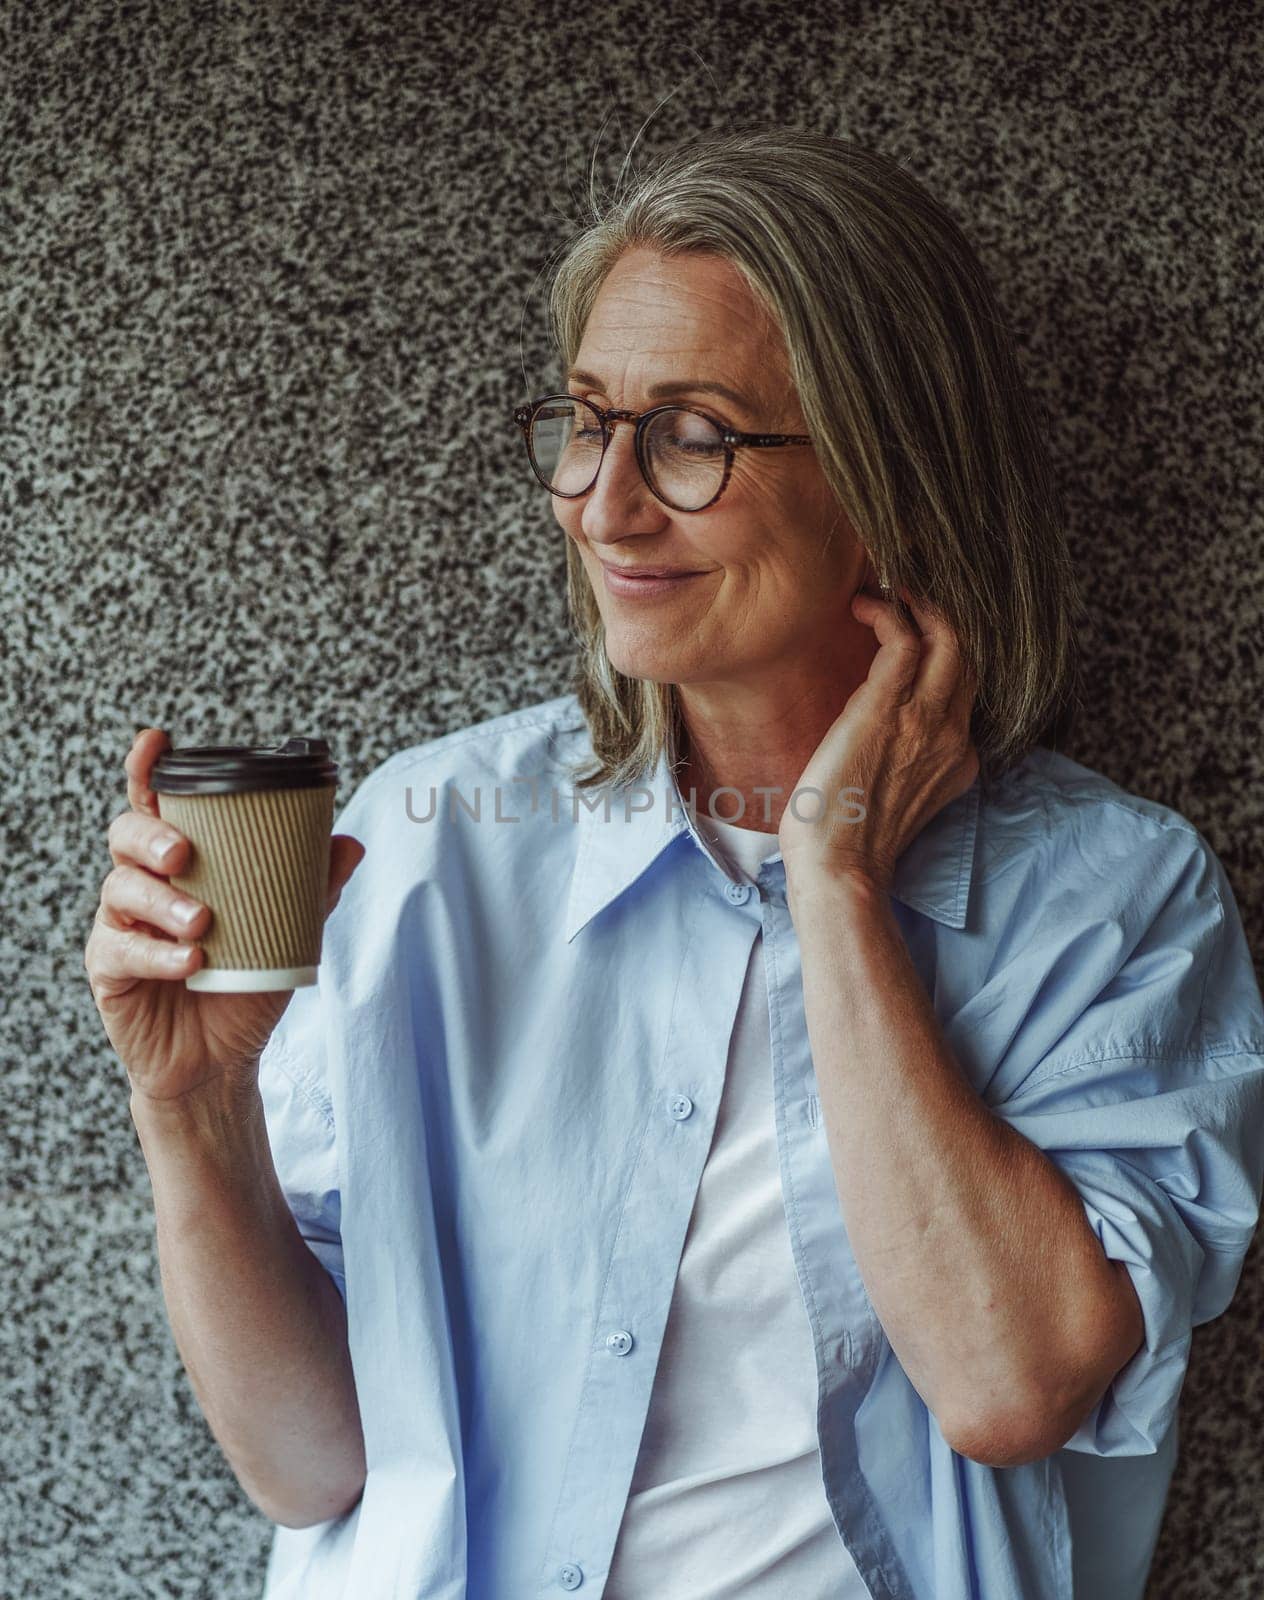 Coffee culture concept. Senior old woman enjoying paper cup of coffee on urban background of marble wall. Woman is depicted savoring moment, taking moment of relaxation and enjoyment with beverage. High quality photo